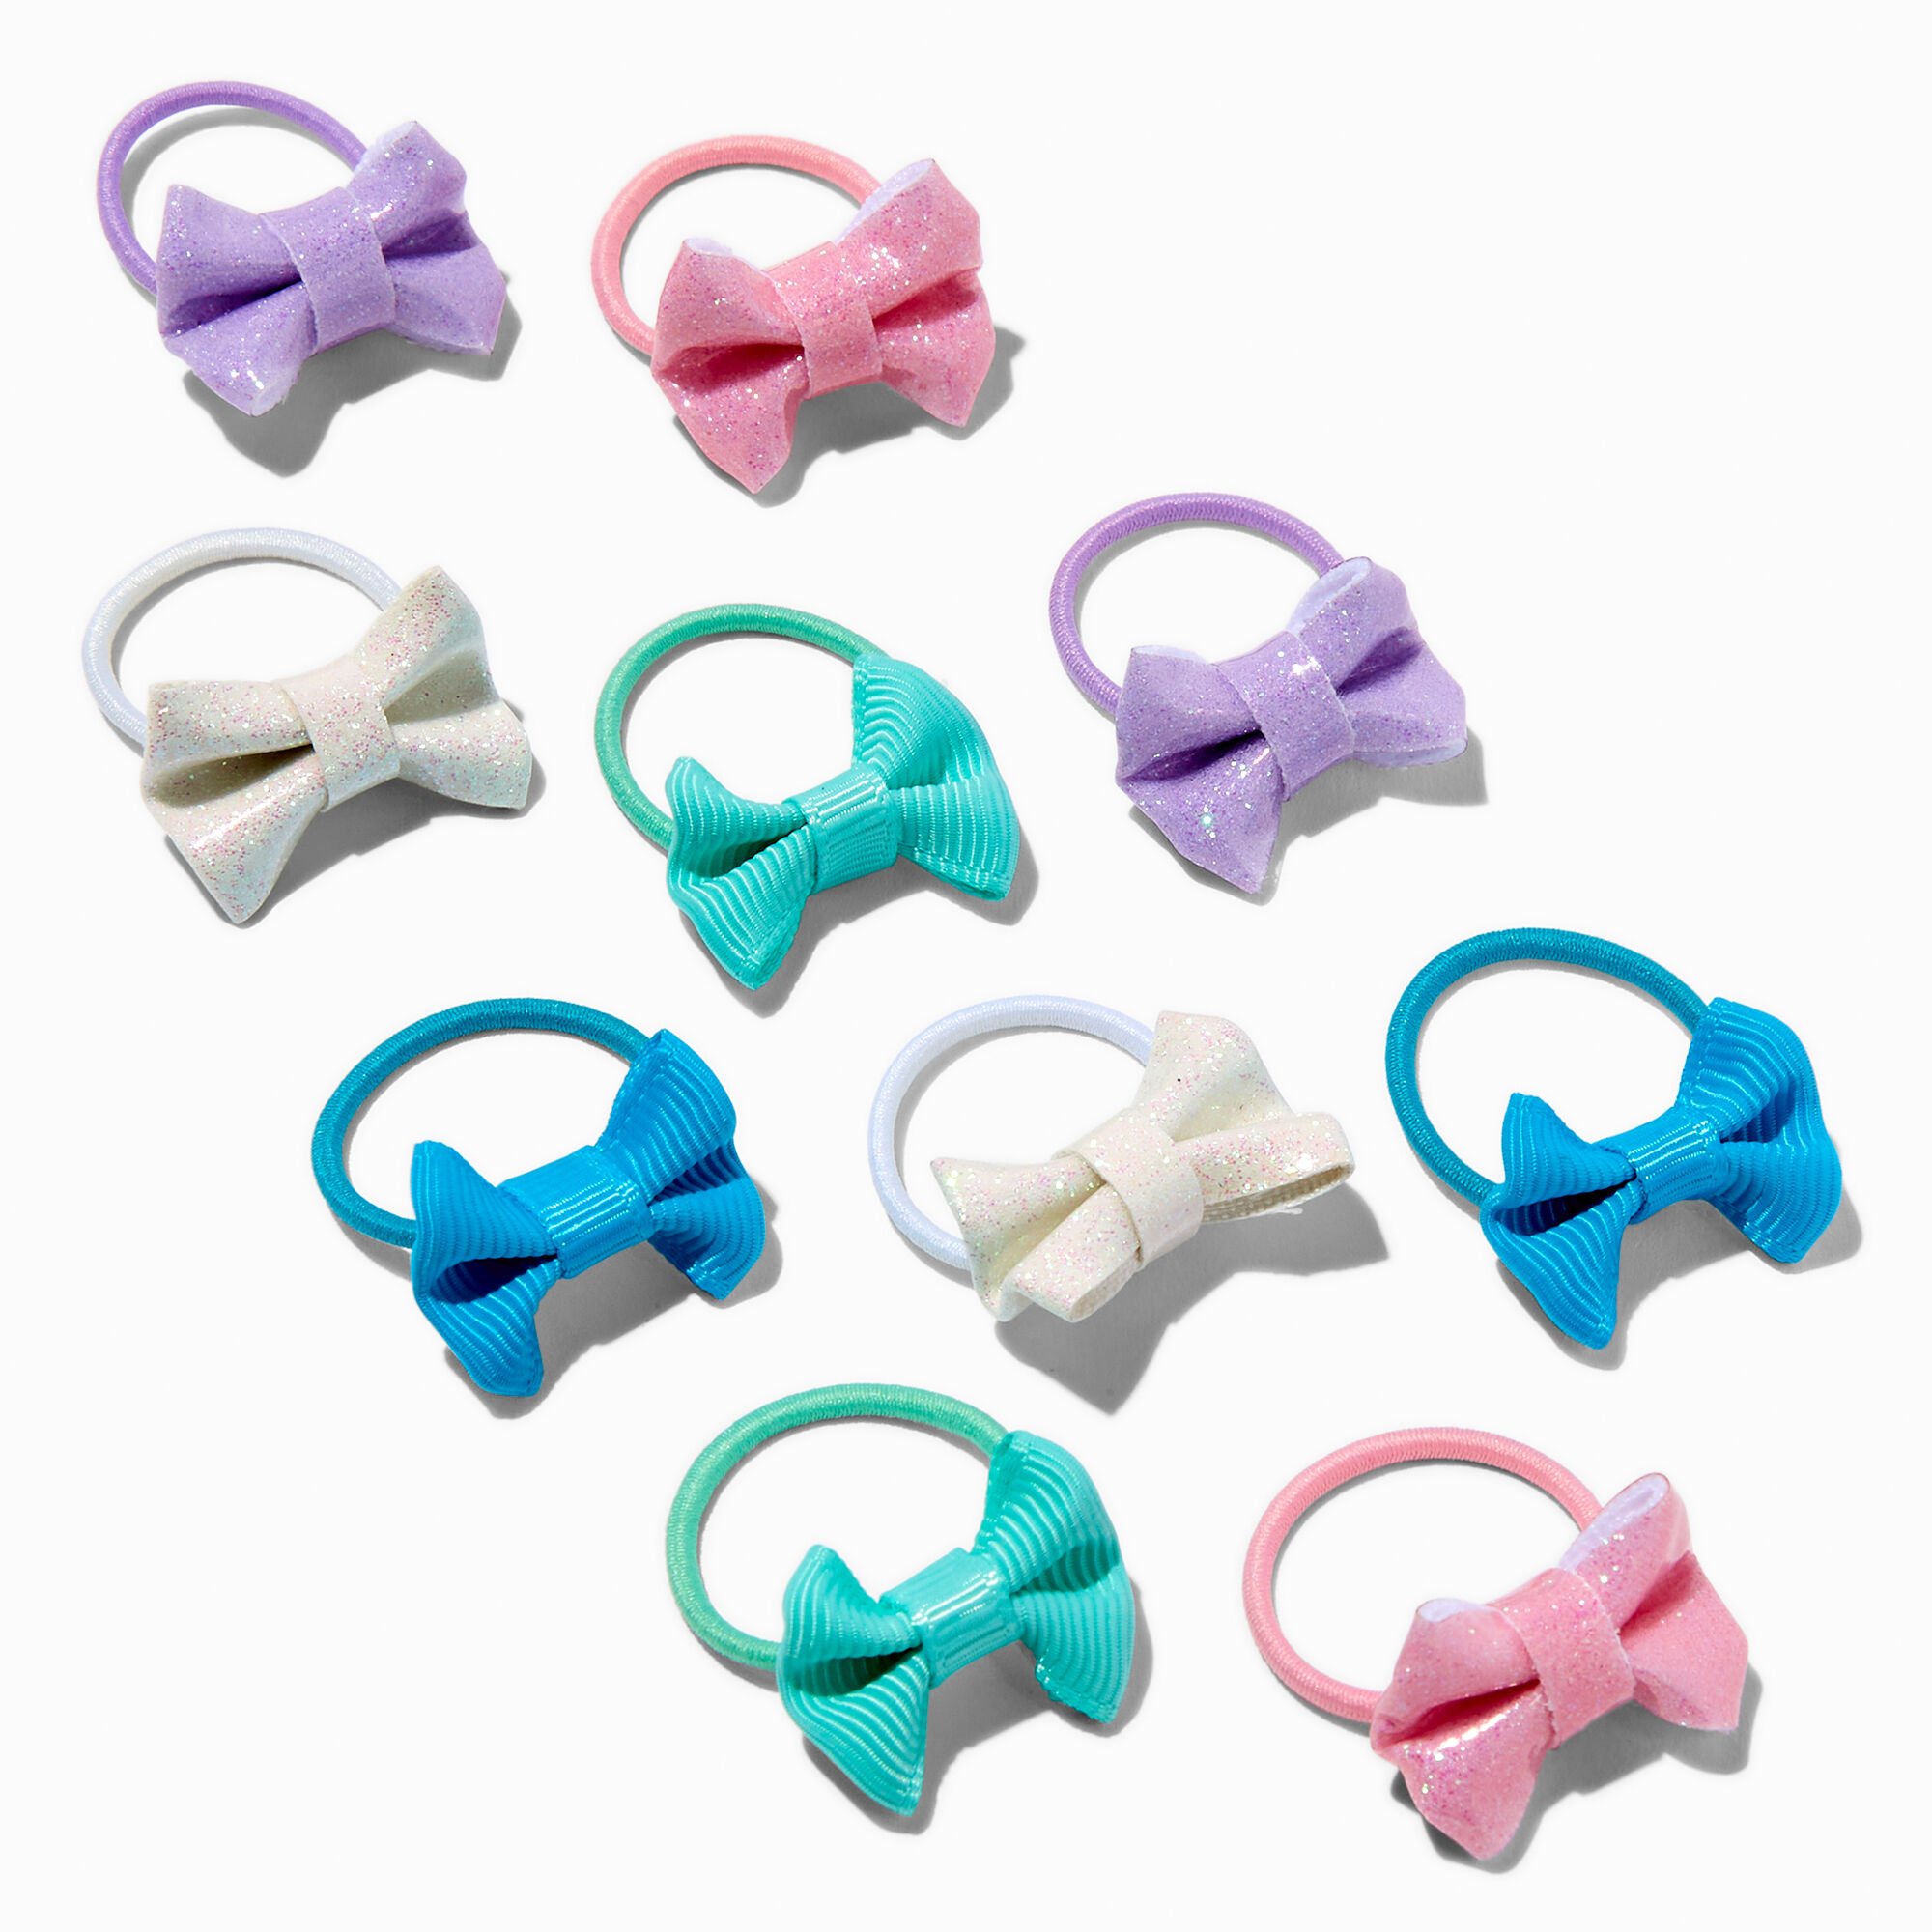 View Claires Club Mermaid Glitter Bow Hair Ties 10 Pack information